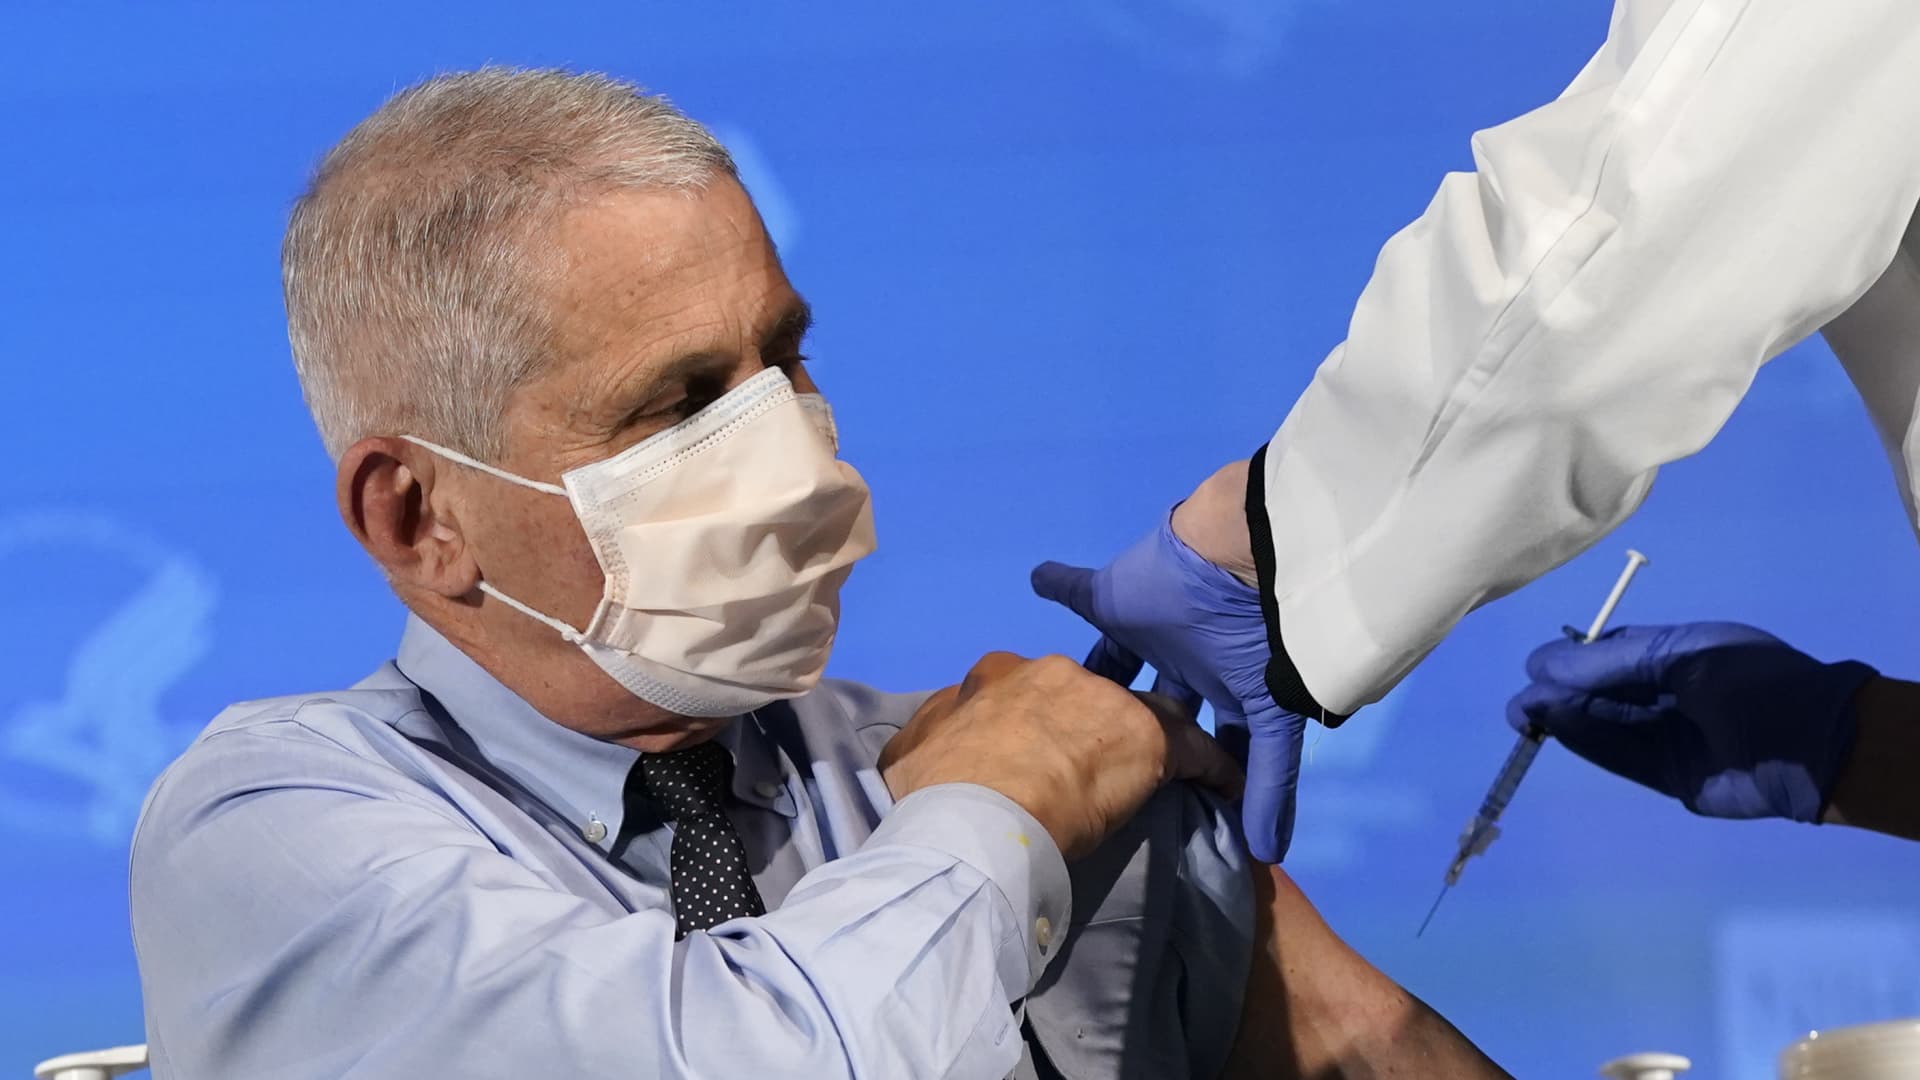 Anthony Fauci, director of the National Institute of Allergy and Infectious Diseases, receives the Moderna Inc. Covid-19 vaccine during an event at the NIH Clinical Center Masur Auditorium in Bethesda, Maryland, U.S., on Tuesday, Dec, 22, 2020.